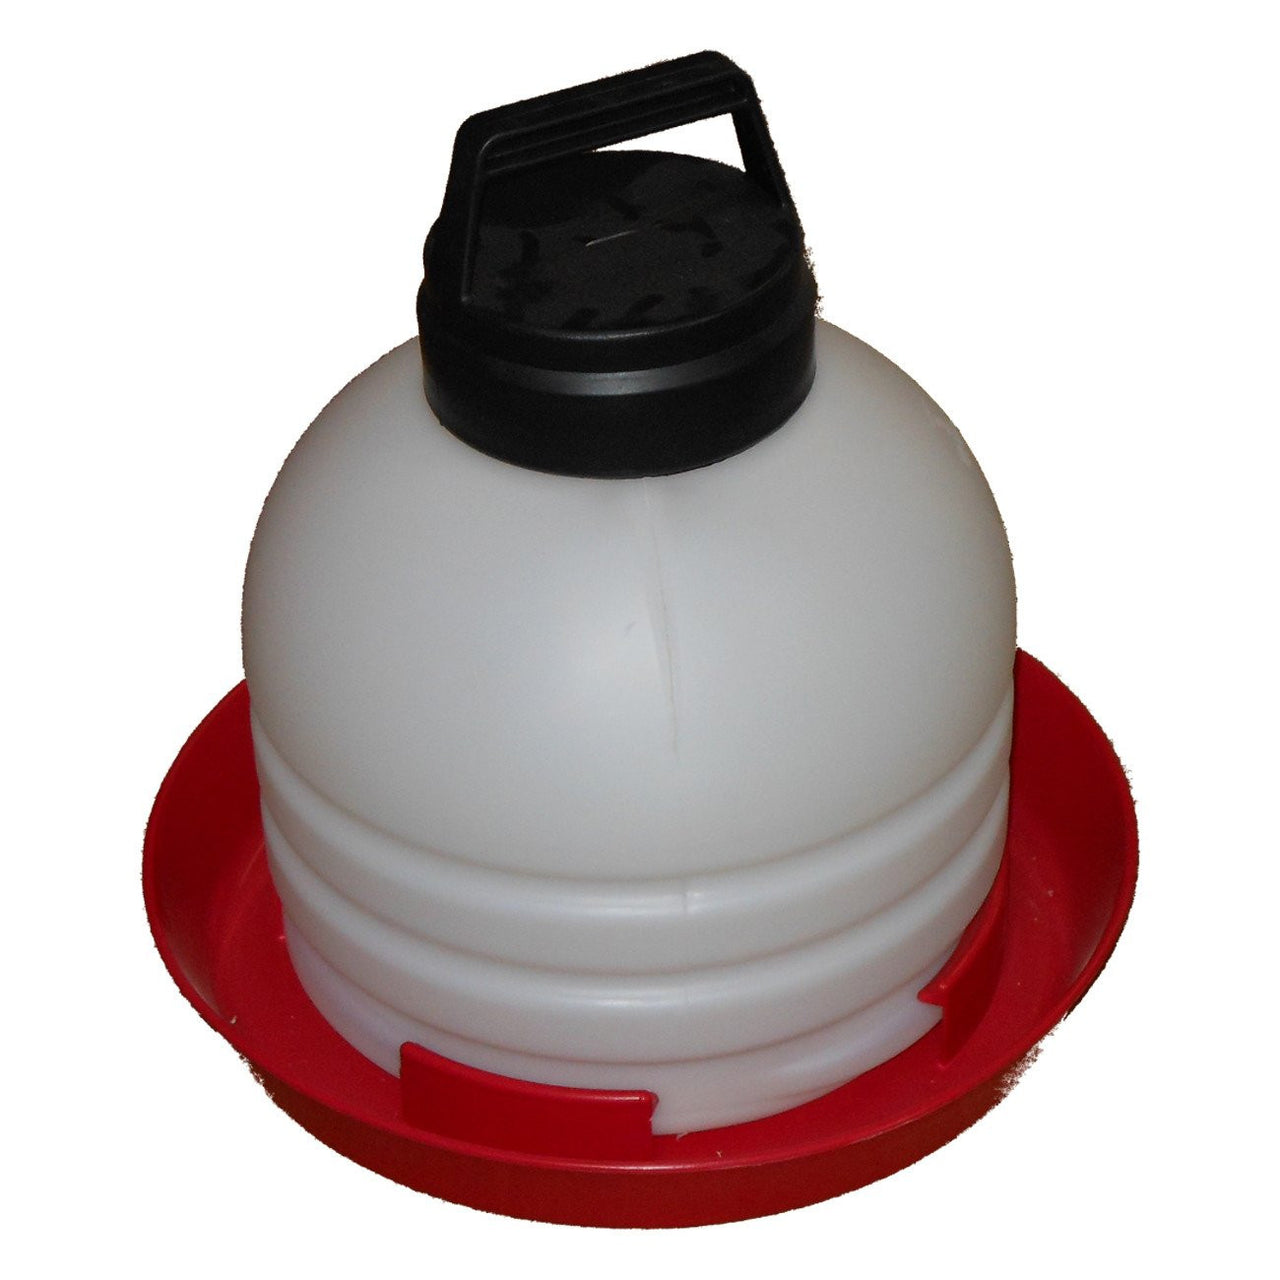 Millside Top Fill Poultry Fountain 3 Gallon (Sold In 2S) - Poultry Waterers Plastic Millside - Canada